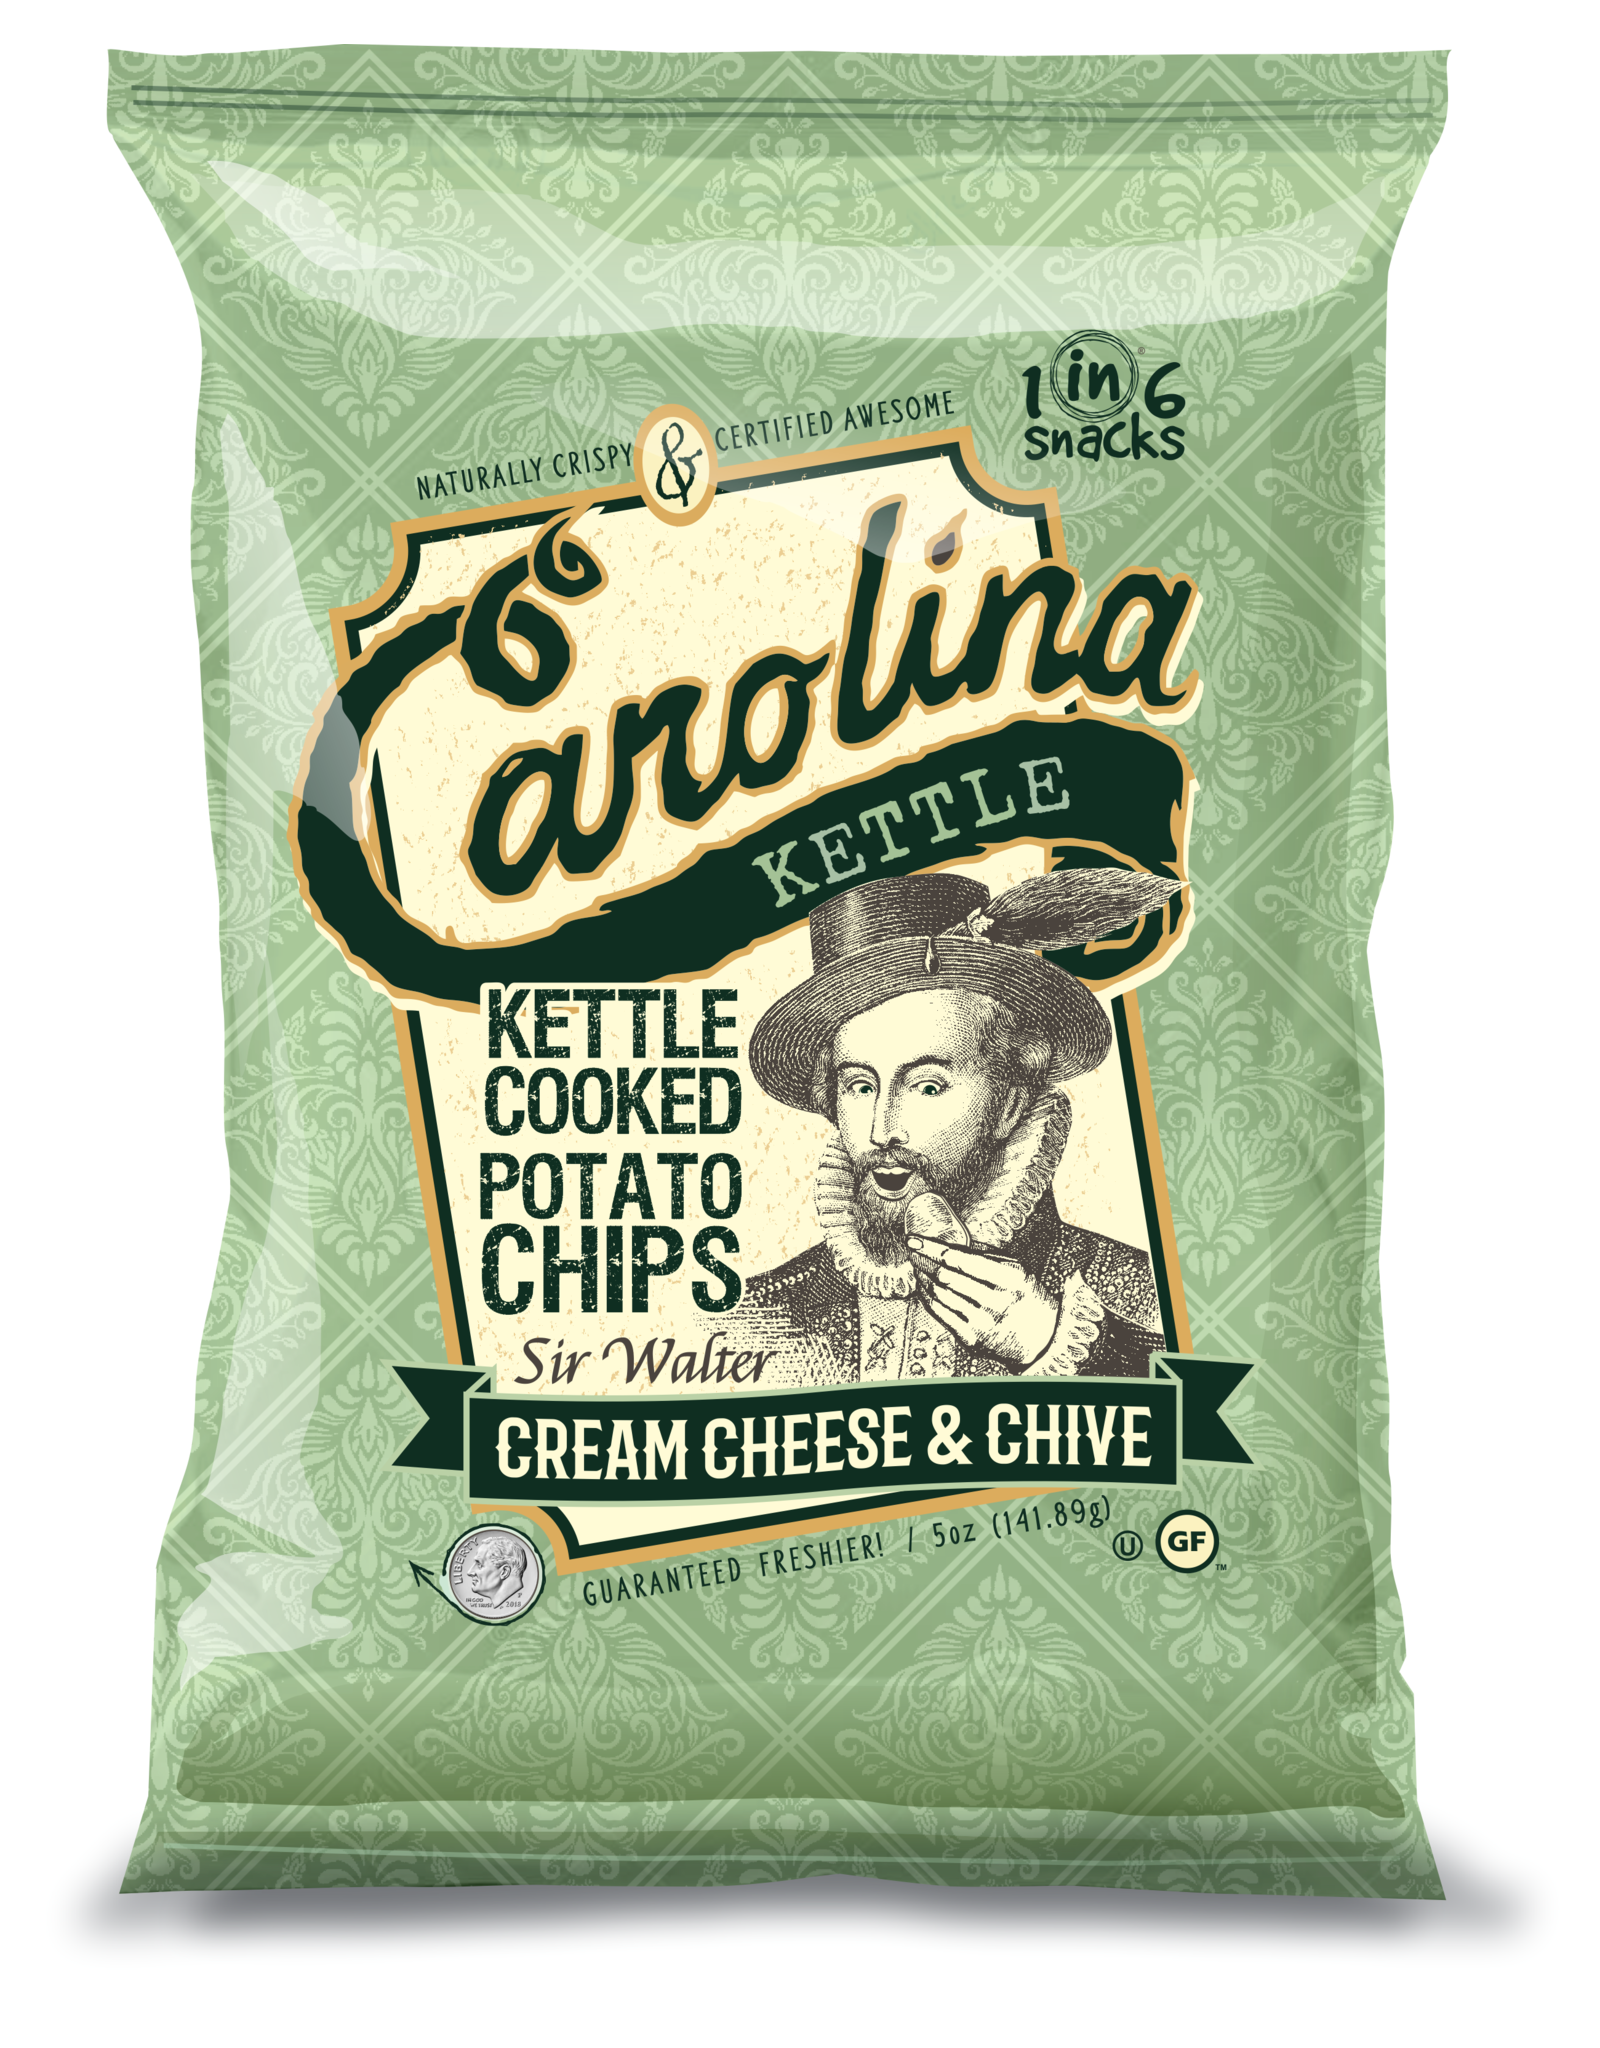 2 oz. Cream Cheese & Chive Carolina Kettle Chips